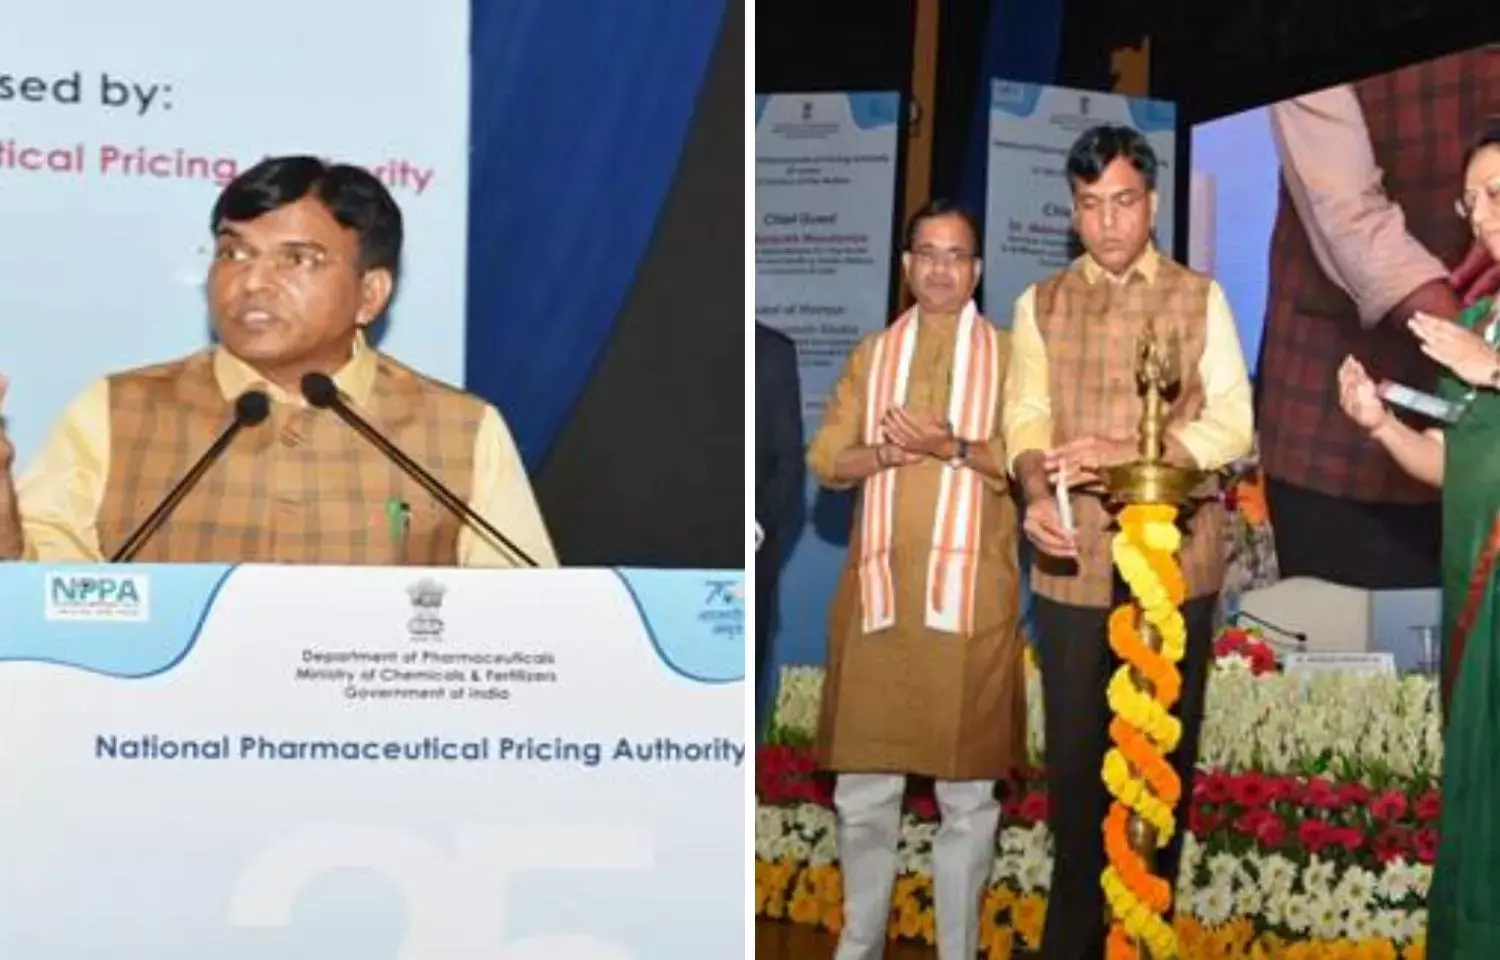 Integrated Pharmaceutical Database Management System 2.0 and Updated Pharma Sahi Dham App Launches by Union Health Minister